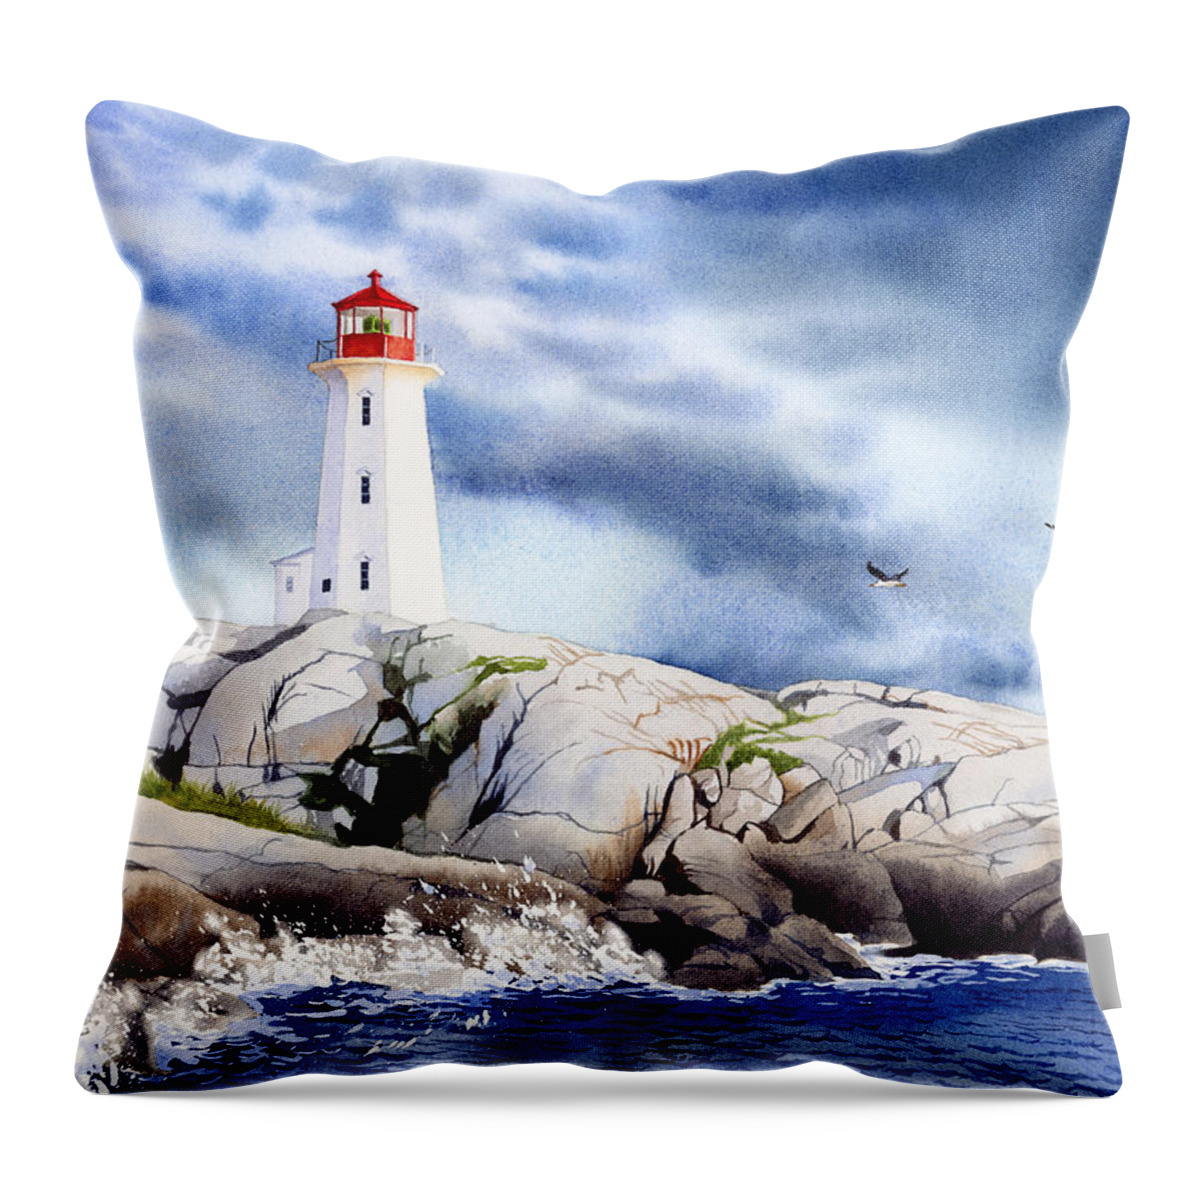 Peggy's Cove Lighthouse Throw Pillow featuring the painting Peggy's Cove Lighthouse by Espero Art